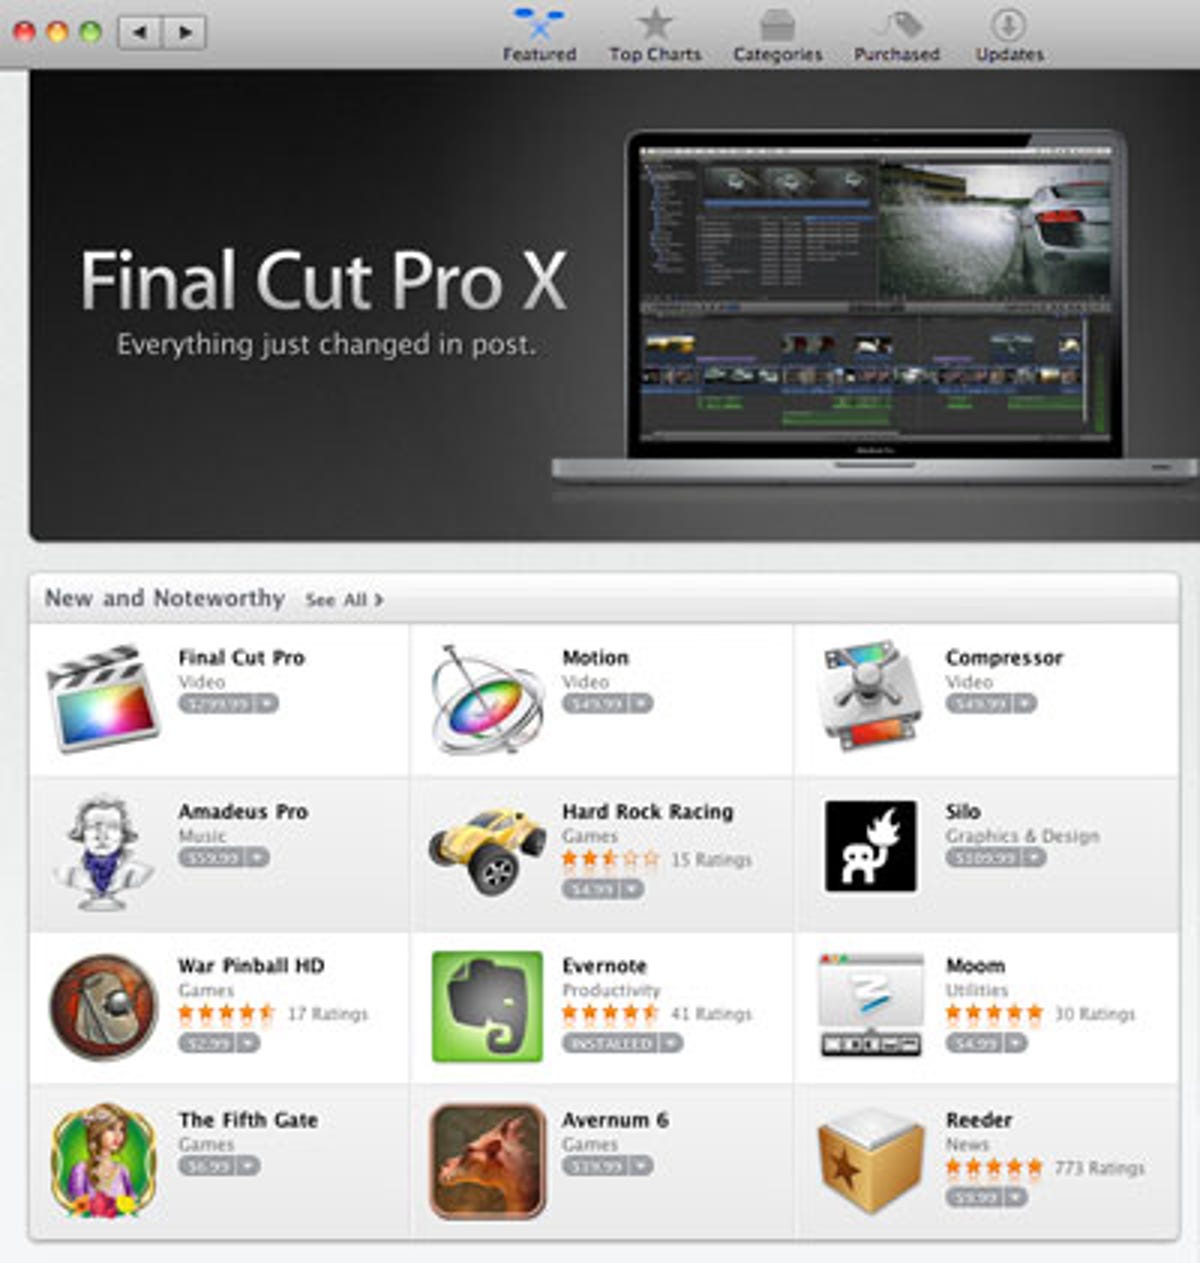 Final Cut Pro X makes its debut on the Mac App Store, the only way people can buy the new video editing software.